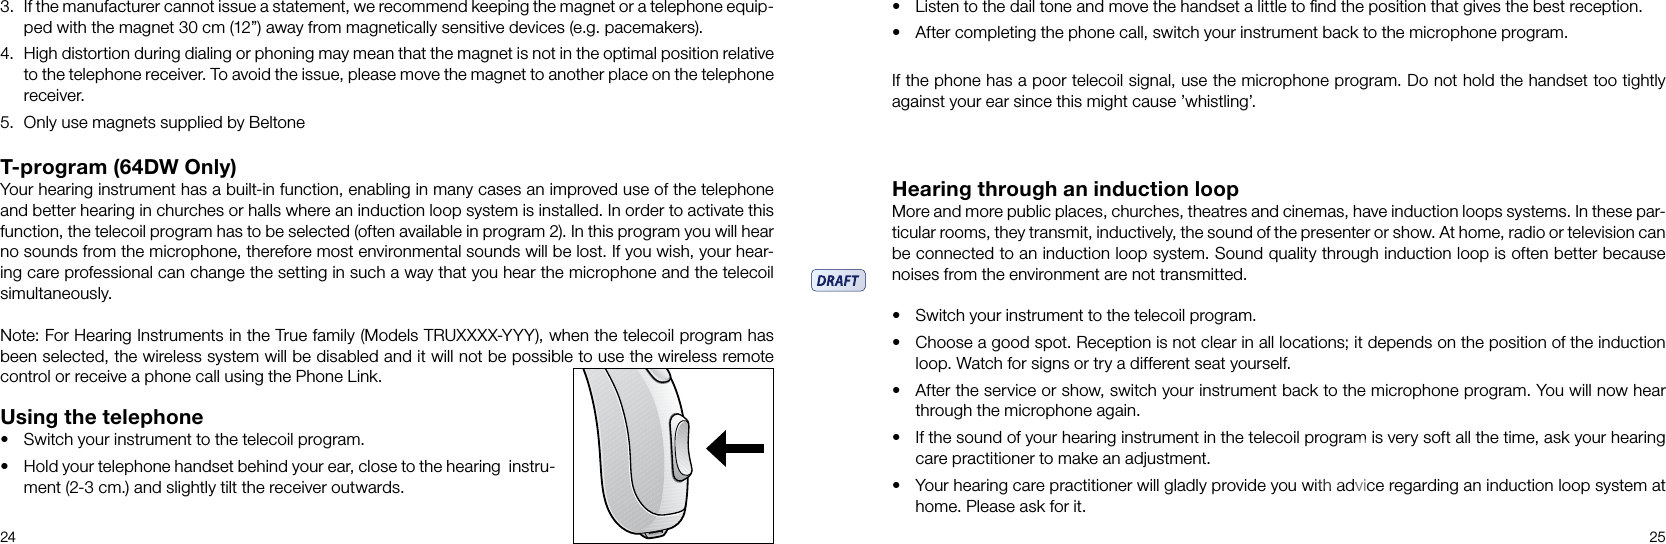 24 25T-program (64DW Only)Your hearing instrument has a built-in function, enabling in many cases an improved use of the telephone and better hearing in churches or halls where an induction loop system is installed. In order to activate this function, the telecoil program has to be selected (often available in program 2). In this program you will hear no sounds from the microphone, therefore most environmental sounds will be lost. If you wish, your hear-ing care professional can change the setting in such a way that you hear the microphone and the telecoil simultaneously. Note: For Hearing Instruments in the True family (Models TRUXXXX-YYY), when the telecoil program has been selected, the wireless system will be disabled and it will not be possible to use the wireless remote control or receive a phone call using the Phone Link.Using the telephone• Switch your instrument to the telecoil program.• Hold your telephone handset behind your ear, close to the hear ing  instru-ment (2-3 cm.) and slightly tilt the receiver outwards.Hearing through an induction loopMore and more public places, churches, theatres and cinemas, have induction loops systems. In these par-ticular rooms, they transmit, inductively, the sound of the presenter or show. At home, radio or television can be connected to an induction loop system. Sound quality through induction loop is often better because noises from the environment are not transmitted. • Switch your instrument to the telecoil program. • Choose a good spot. Reception is not clear in all locations; it depends on the position of the induction loop. Watch for signs or try a different seat yourself.• After the service or show, switch your instrument back to the microphone program. You will now hear through the microphone again.• If the sound of your hearing instrument in the telecoil program is very soft all the time, ask your hearing care practitioner to make an adjustment.• Your hearing care practitioner will gladly provide you with advice regarding an induction loop system at home. Please ask for it.3.  If the manufacturer cannot issue a statement, we recommend keeping the magnet or a telephone equip-ped with the magnet 30 cm (12”) away from magnetically sensitive devices (e.g. pacemakers).4.  High distortion during dialing or phoning may mean that the magnet is not in the optimal position relative to the telephone receiver. To avoid the issue, please move the magnet to another place on the telephone receiver. 5.  Only use magnets supplied by Beltone• Listen to the dail tone and move the handset a little to ﬁnd the position that gives the best reception.• After completing the phone call, switch your instrument back to the microphone program.If the phone has a poor telecoil signal, use the microphone program. Do not hold the handset too tightly against your ear since this might cause ’whistling’.